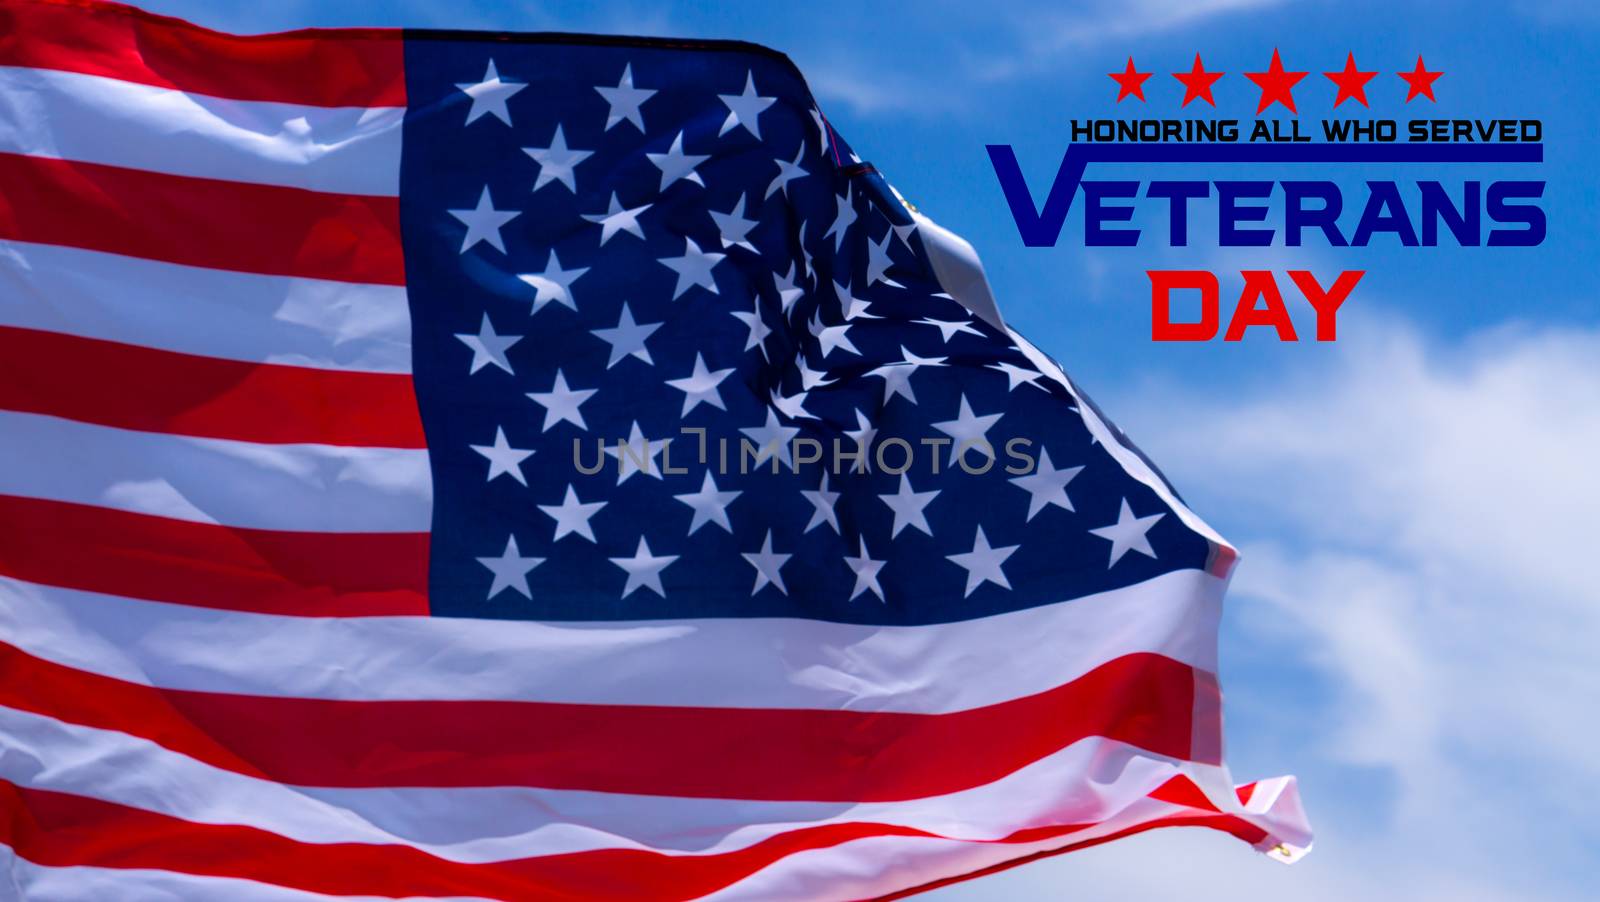 Happy Veterans Day with American flags on blue sky background. by mikesaran